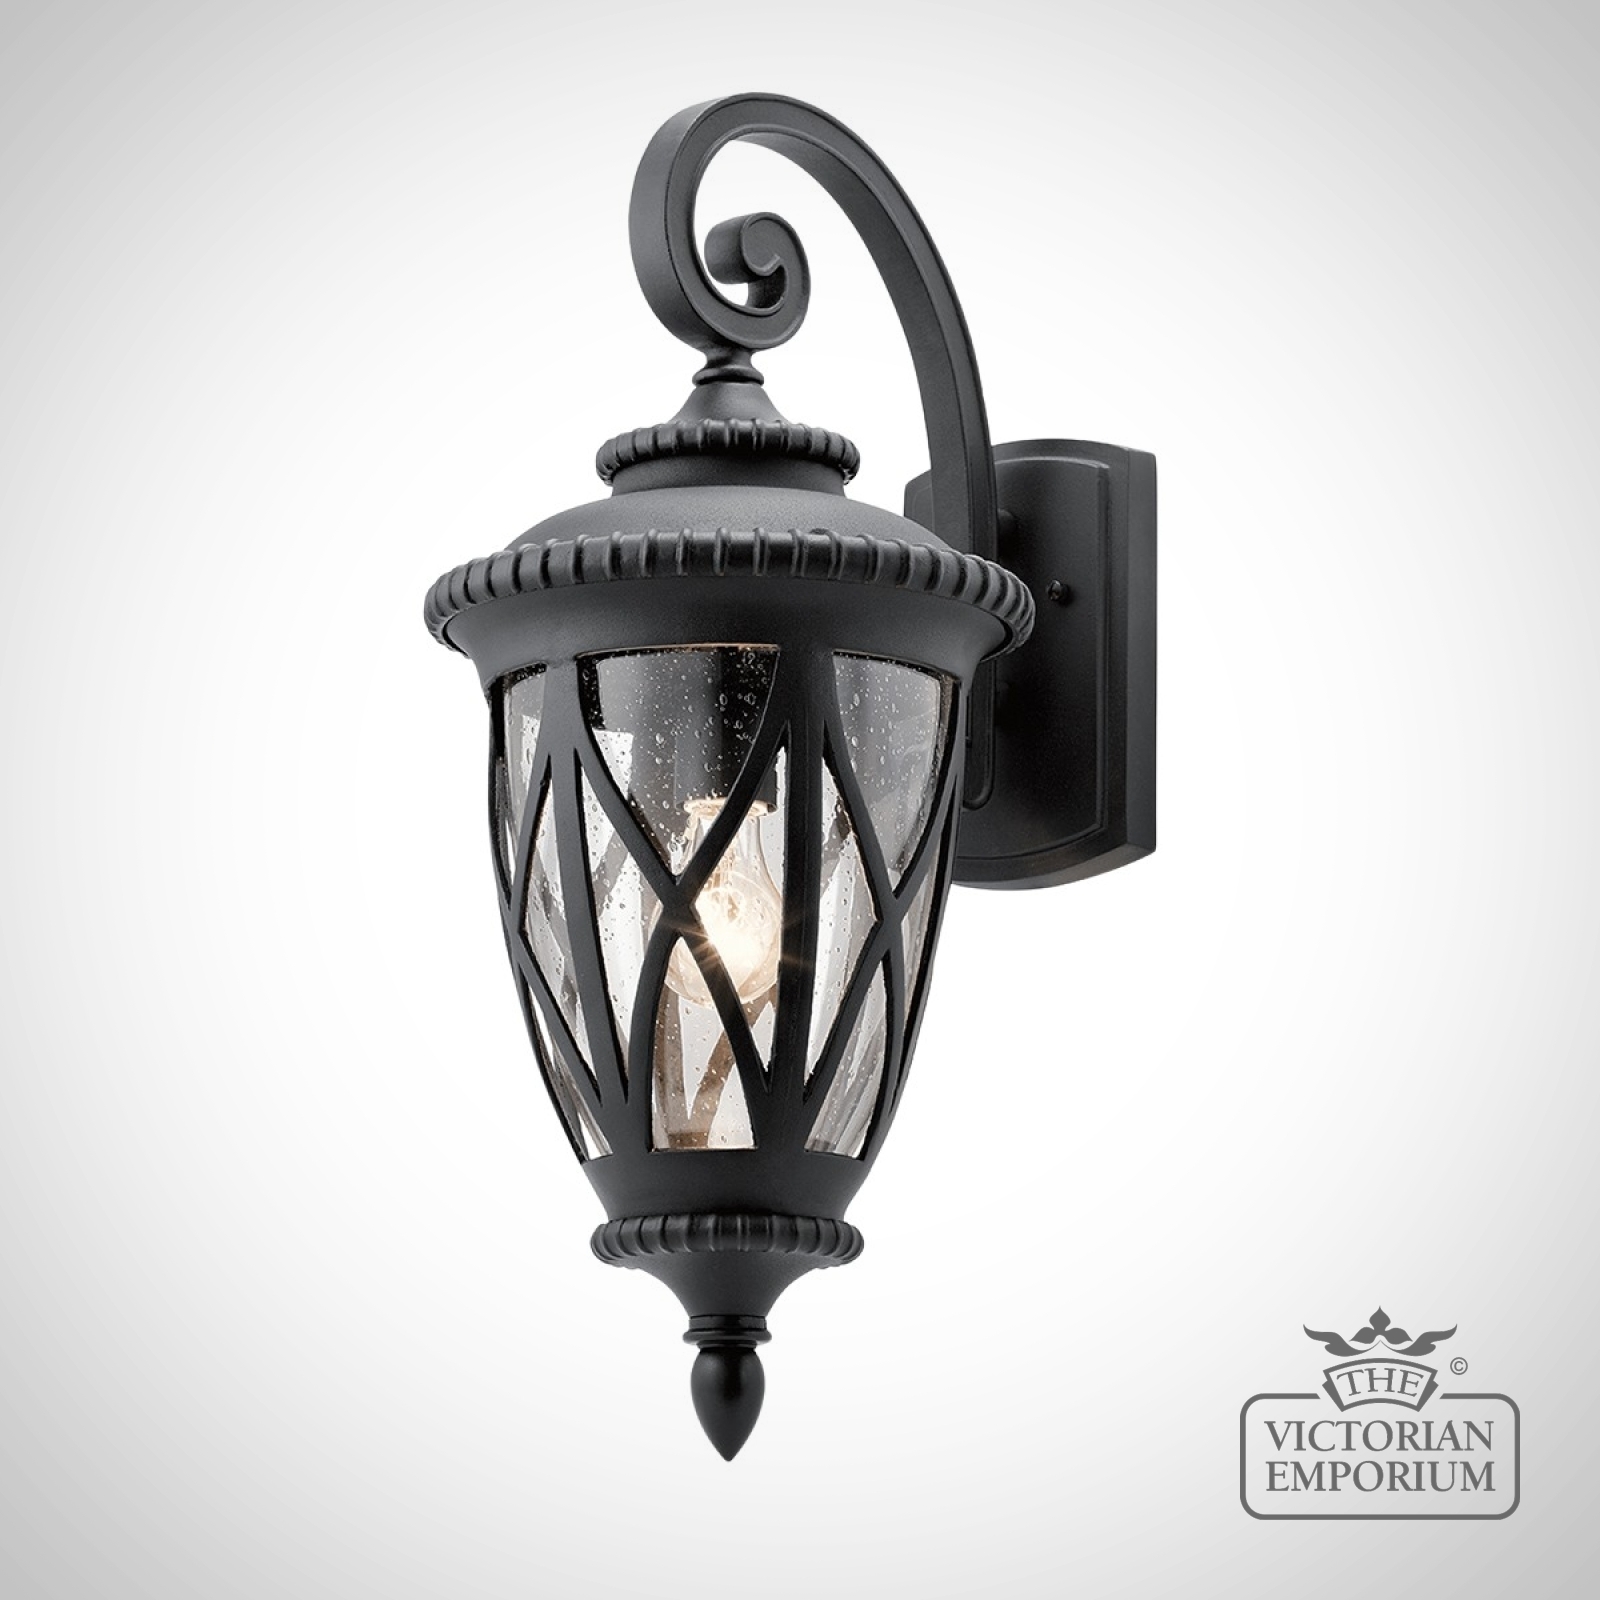 Admiral exterior wall light in a choice of sizes